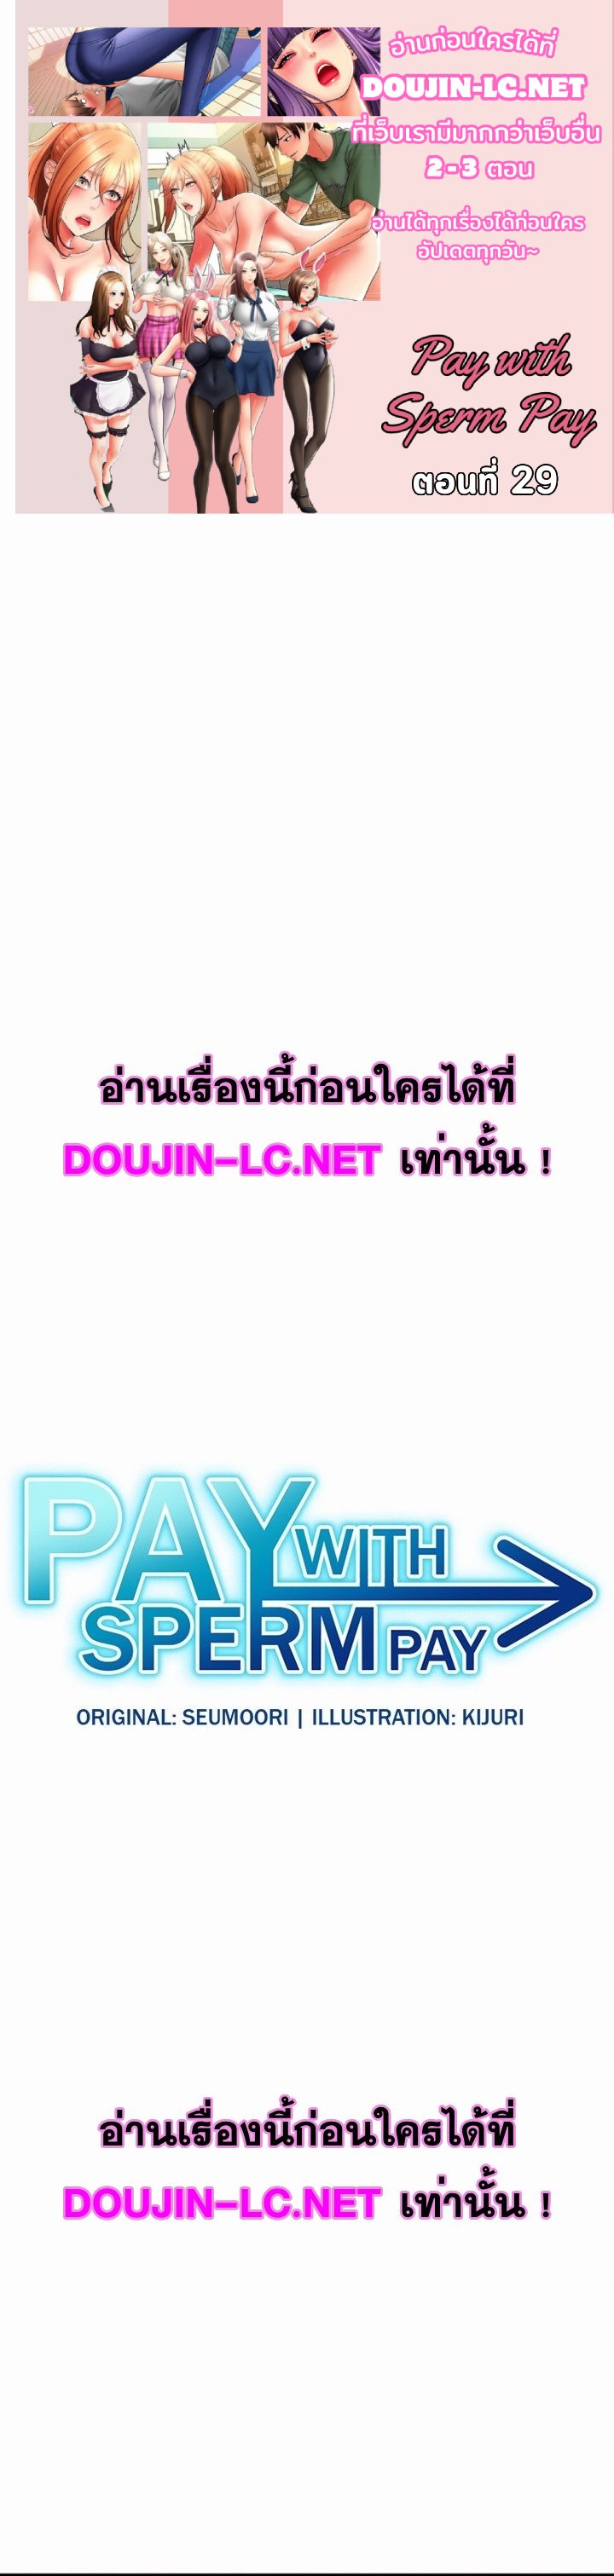 Pay with Sperm Pay 29 01